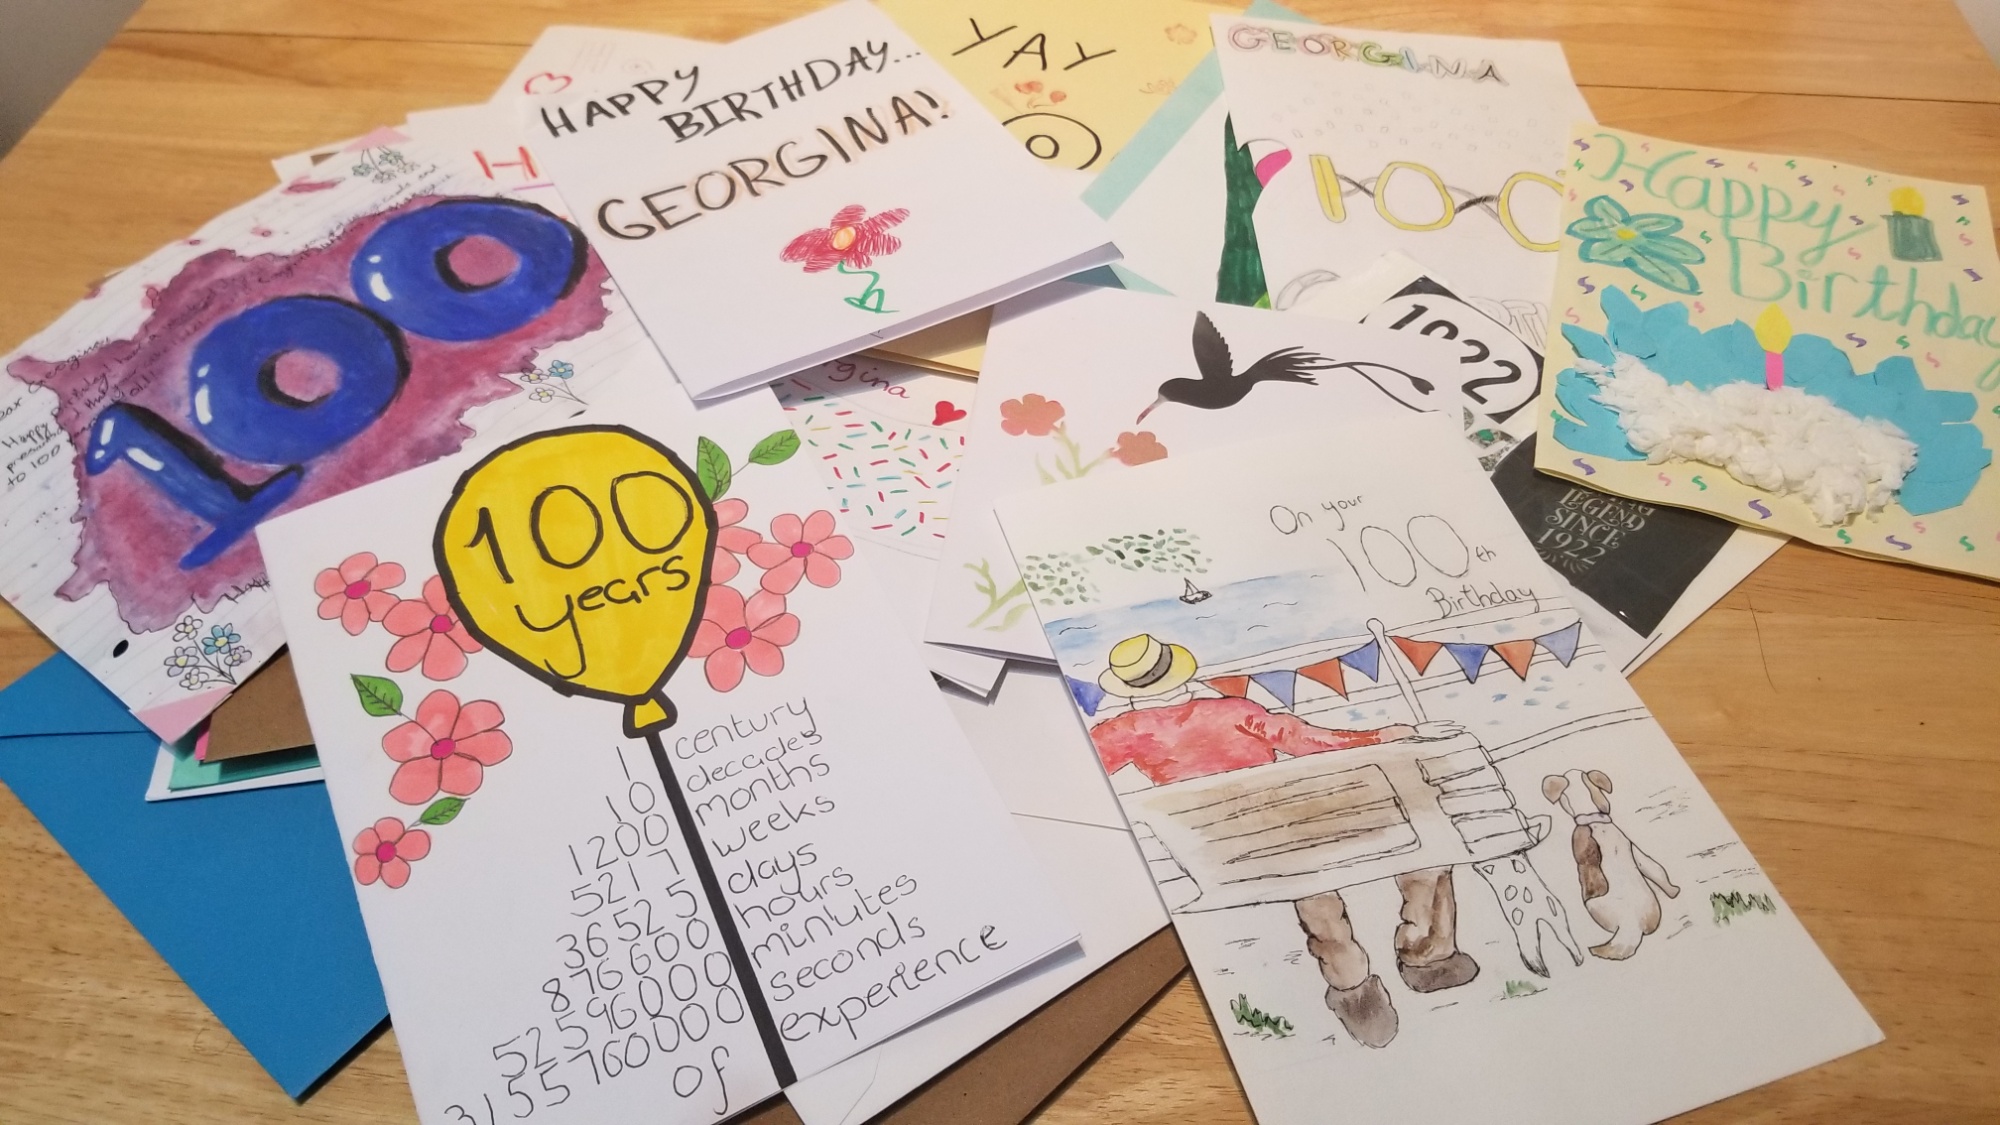 100th Birthday Cards designed by Warlingham Students 